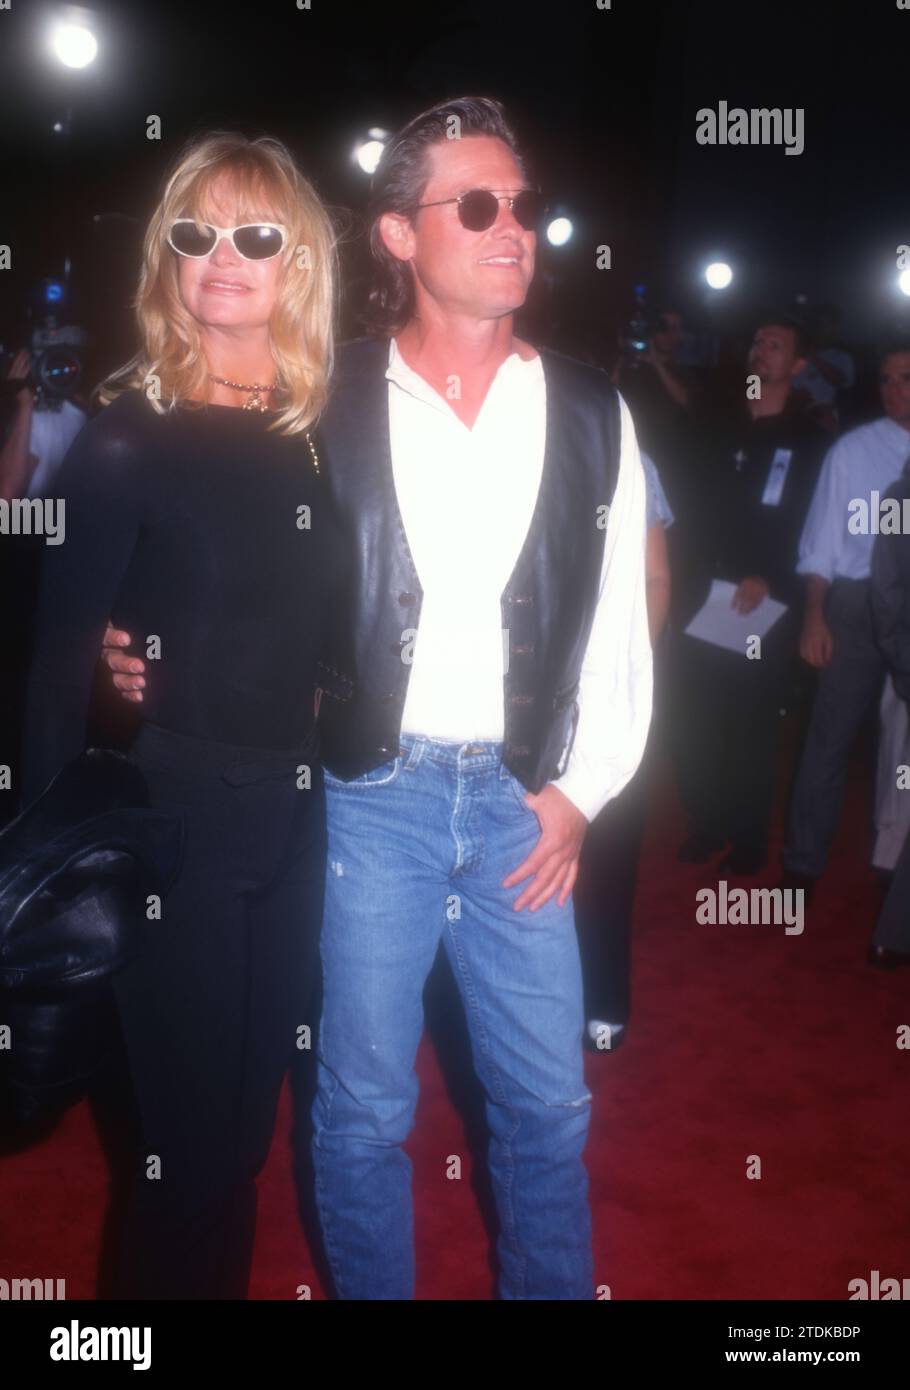 Los Angeles, California, USA 7th August 1996 Actress Goldie Hawn and Actor Kurt Russell attend Paramount Pictures Escape From LA Premiere at Mann Chinese Theatre on August 7, 1996 in Los Angeles, California, USA. Photo by Barry King/Alamy Stock Photo Stock Photo